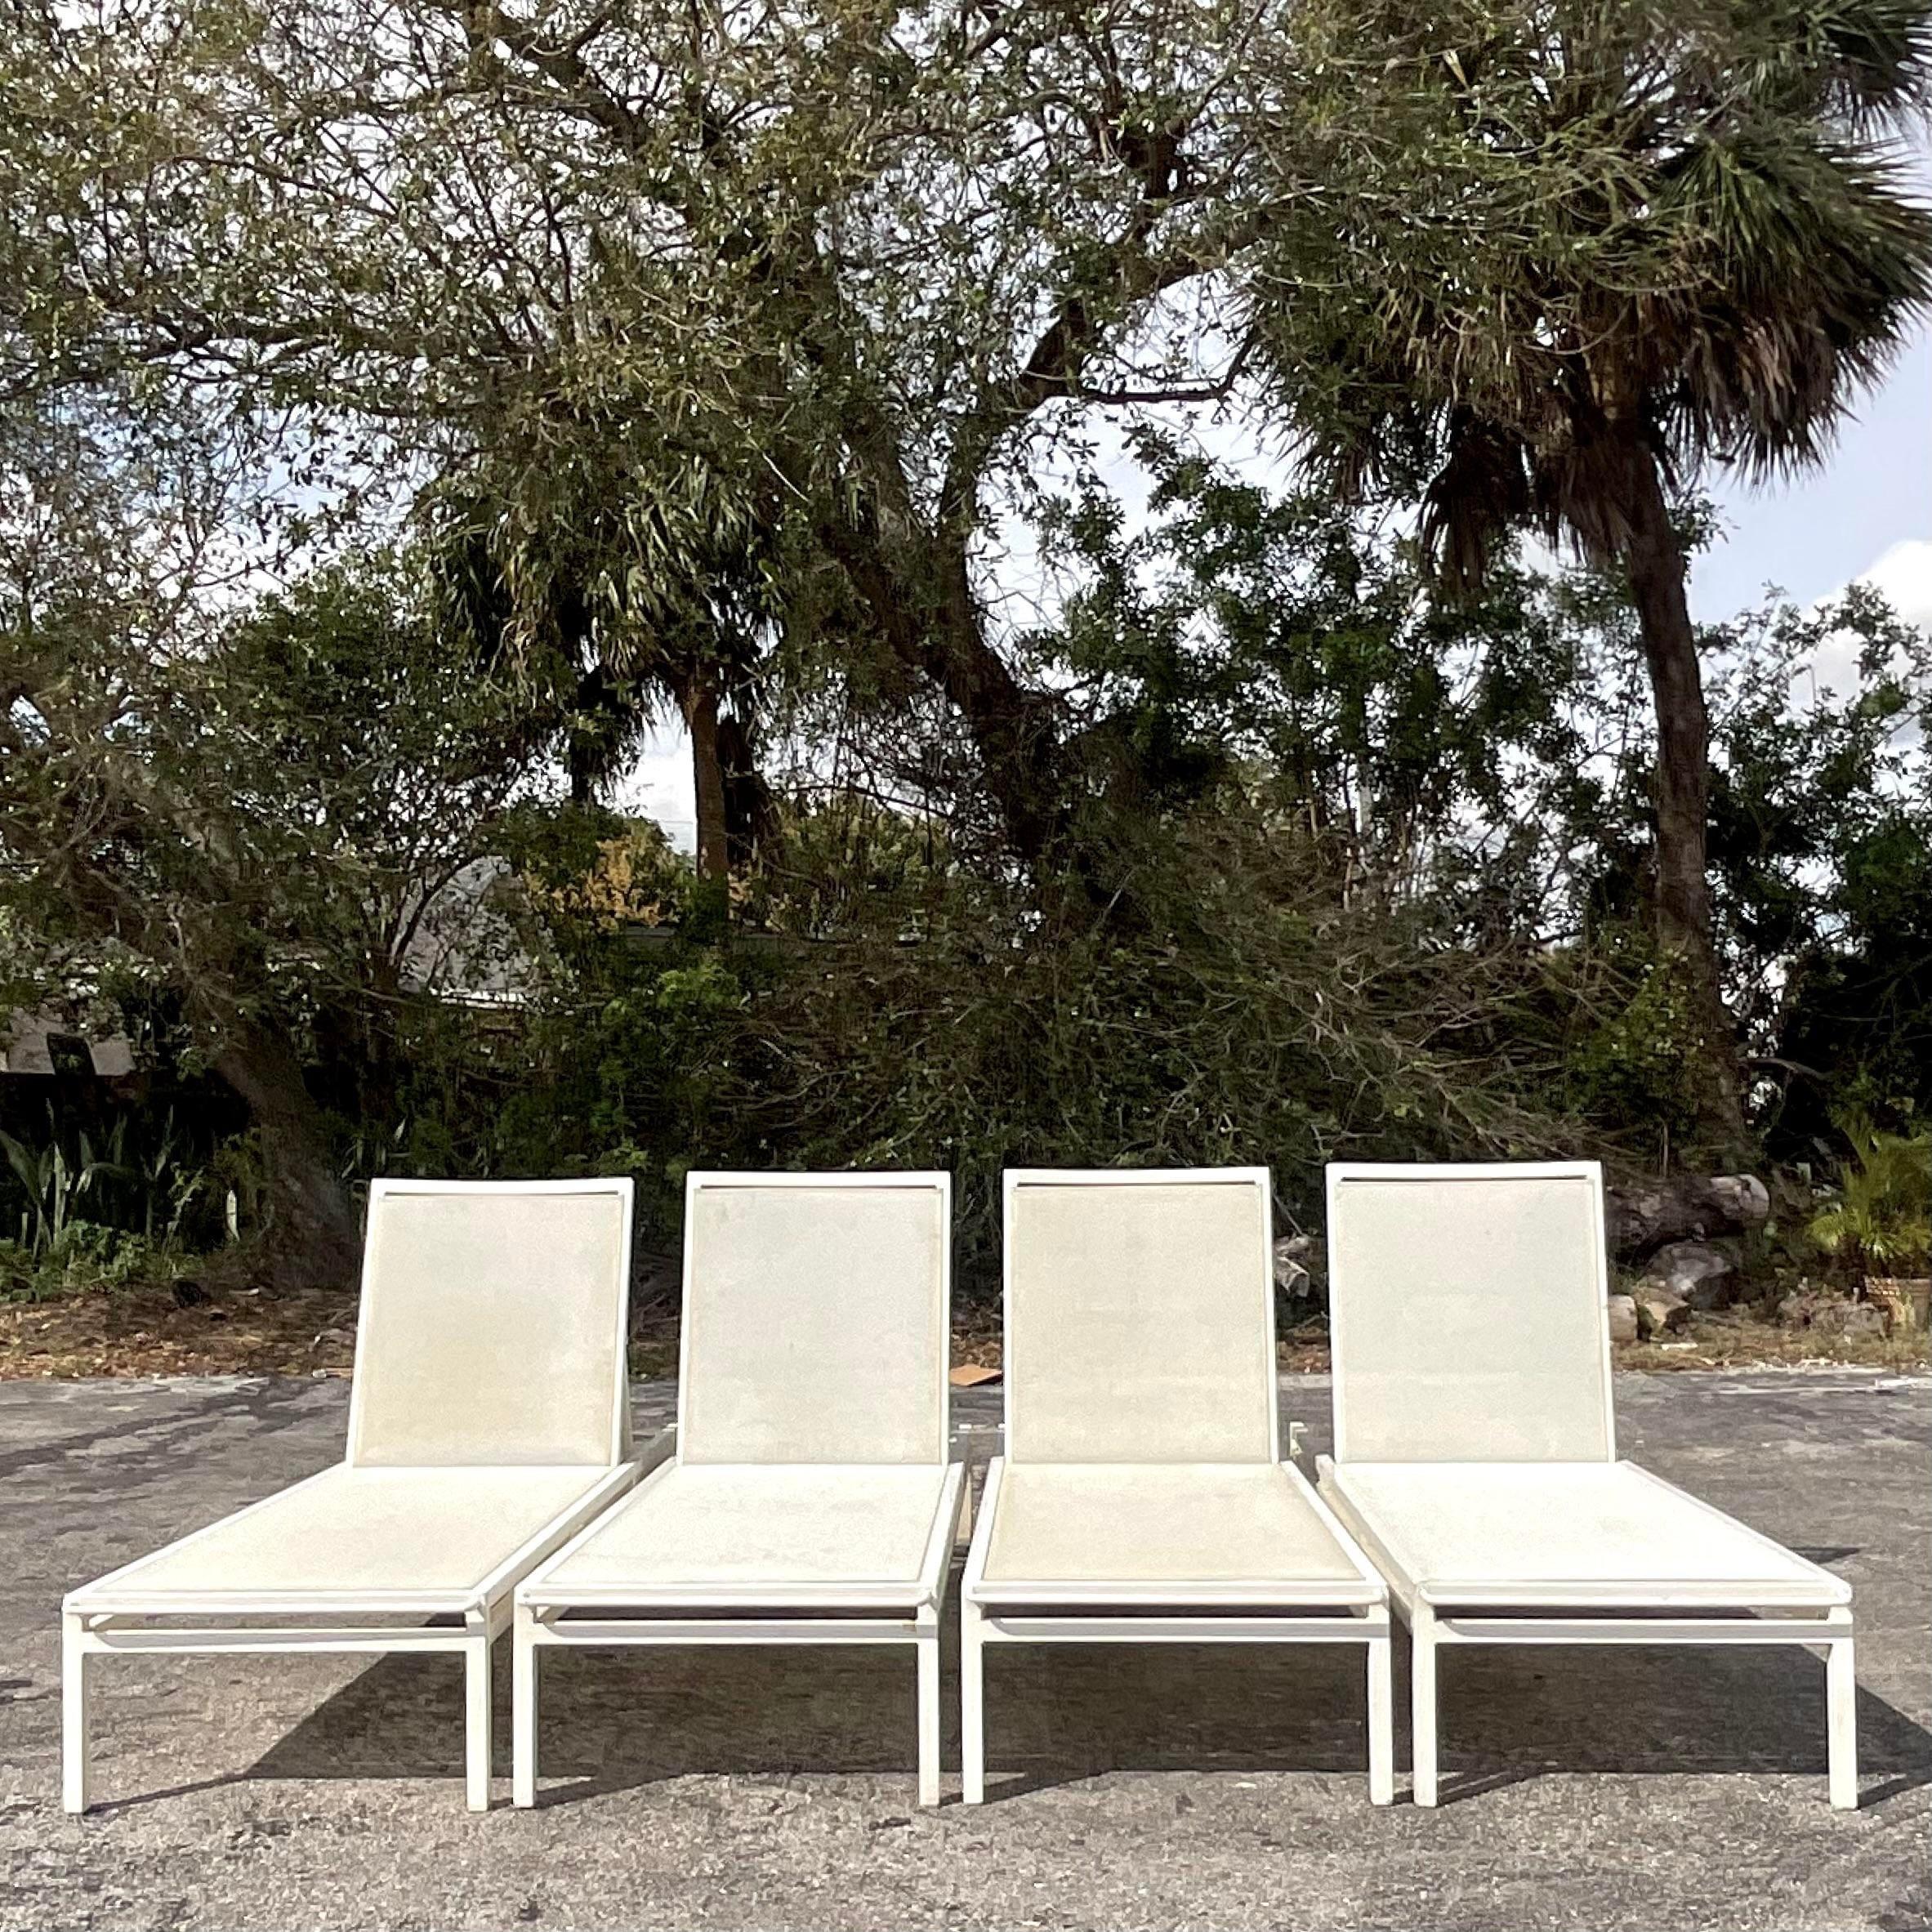 A fabulous pair of vintage Coastal chaise lounge chairs. Made by the iconic Janus et Cie and tagged on the back. A chic cast aluminum frame with a inset mesh seat. Two sets of two available on my page. Acquired from a Palm Beach estate